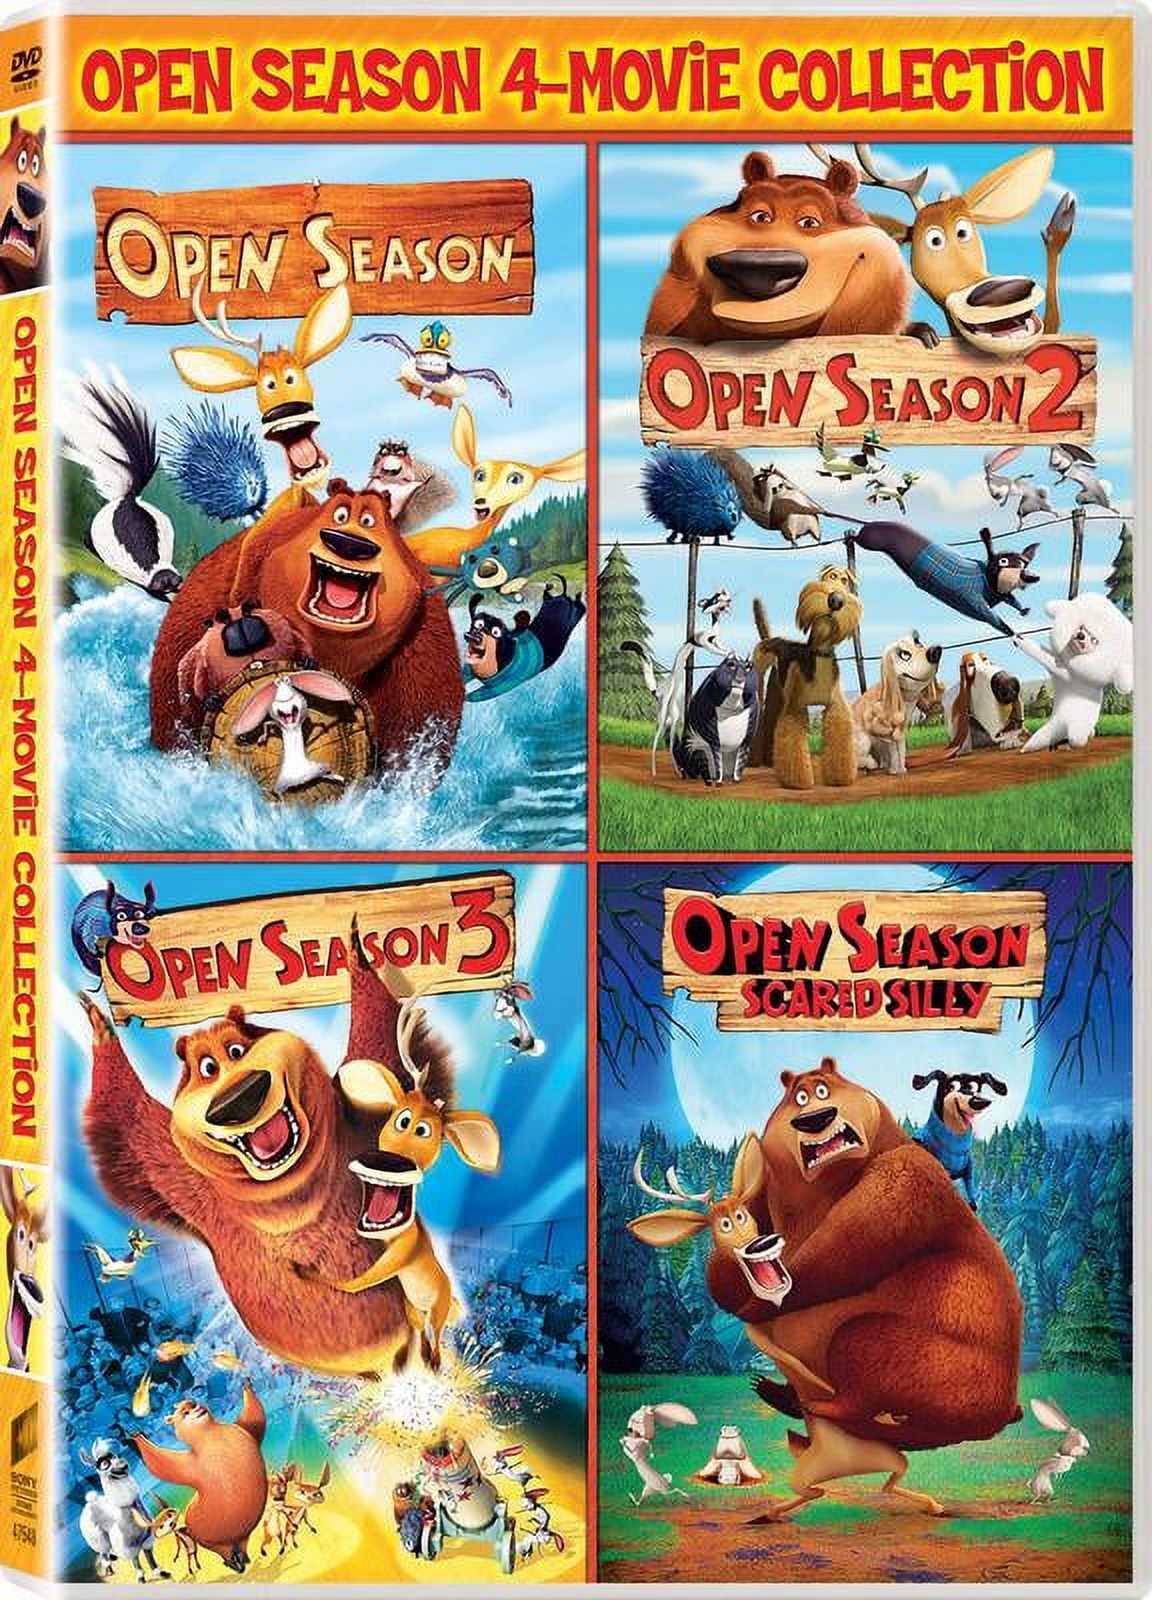 Open Season / Open Season 2 / Open Season 3 / Open Season: Scared Silly (DVD) - image 1 of 5